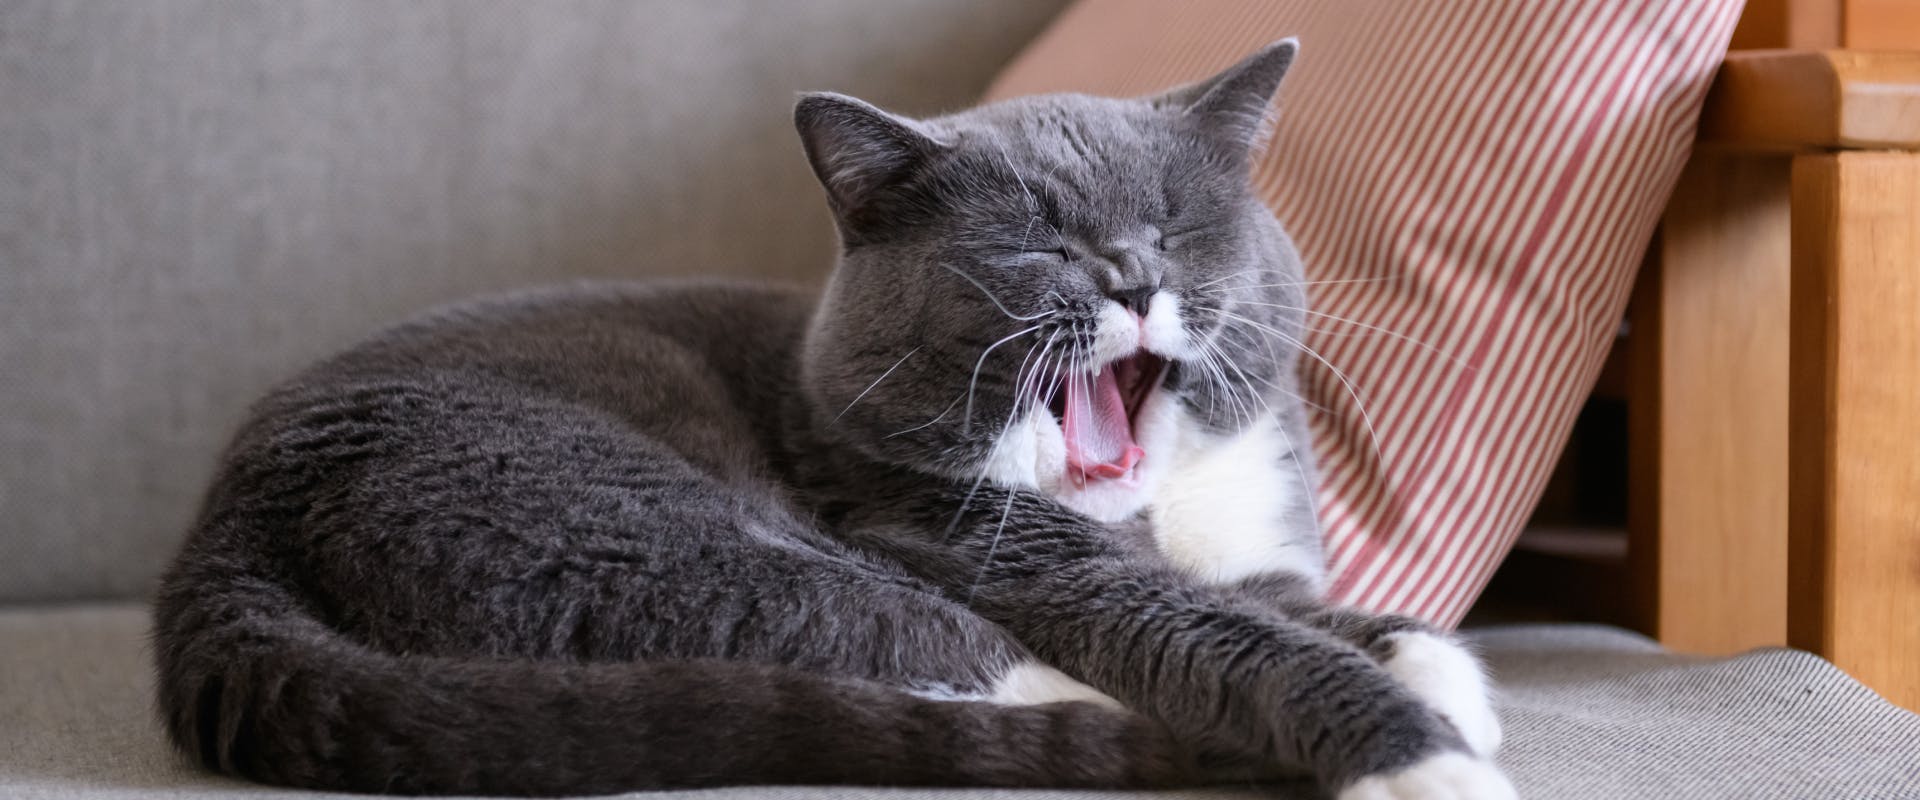 A cat yawns on the sofa. 